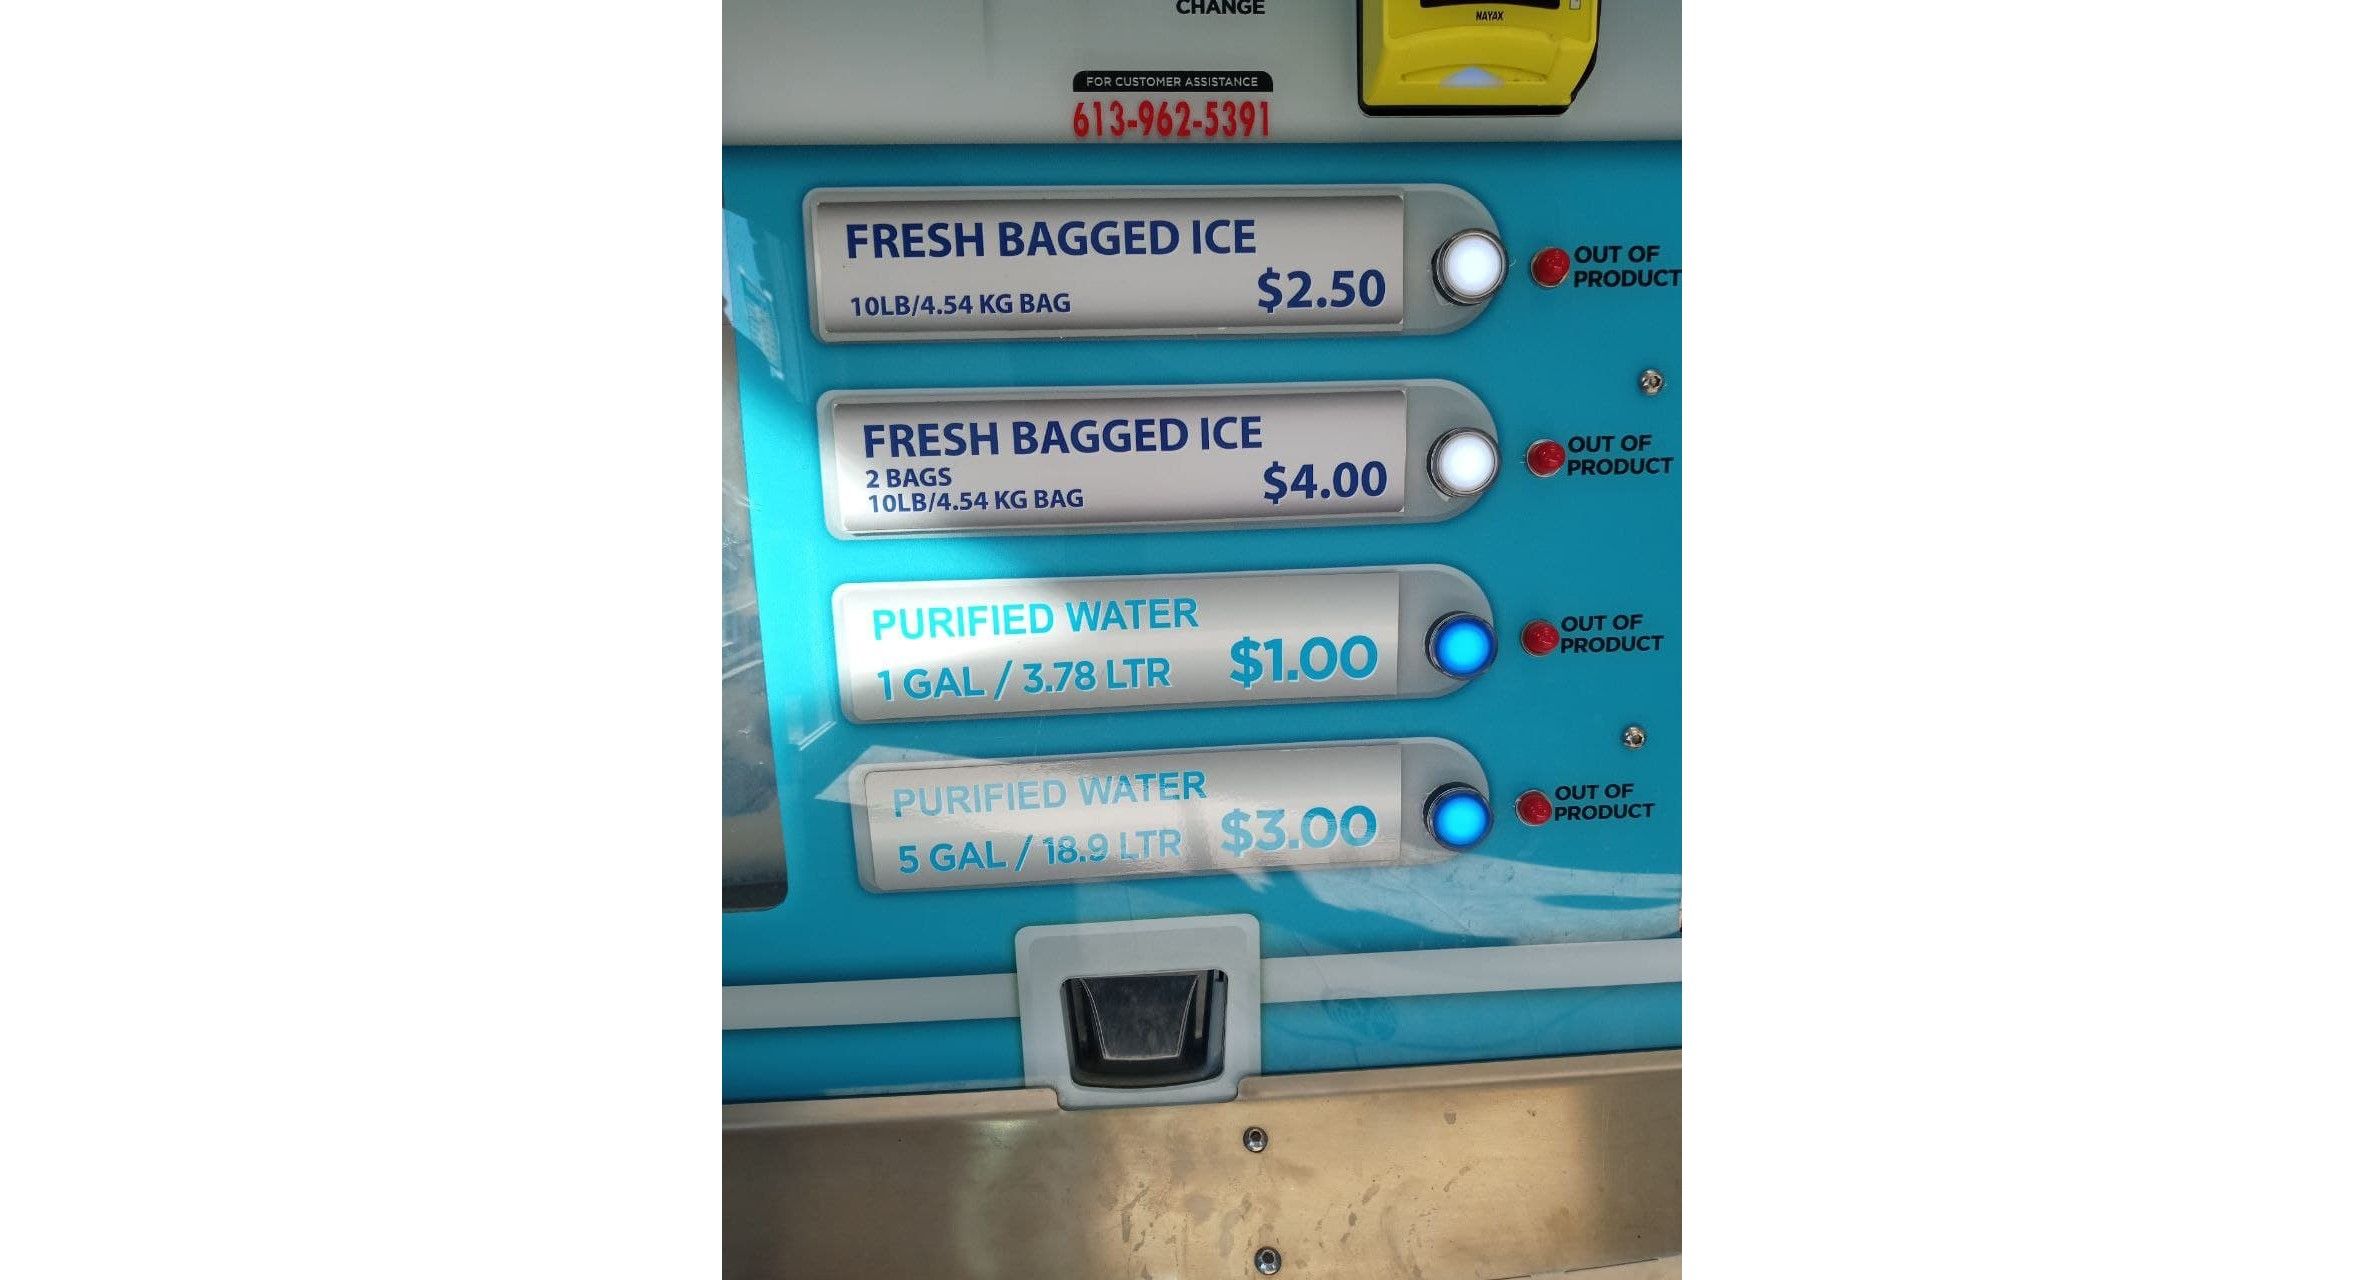 Price selection for bags of ice